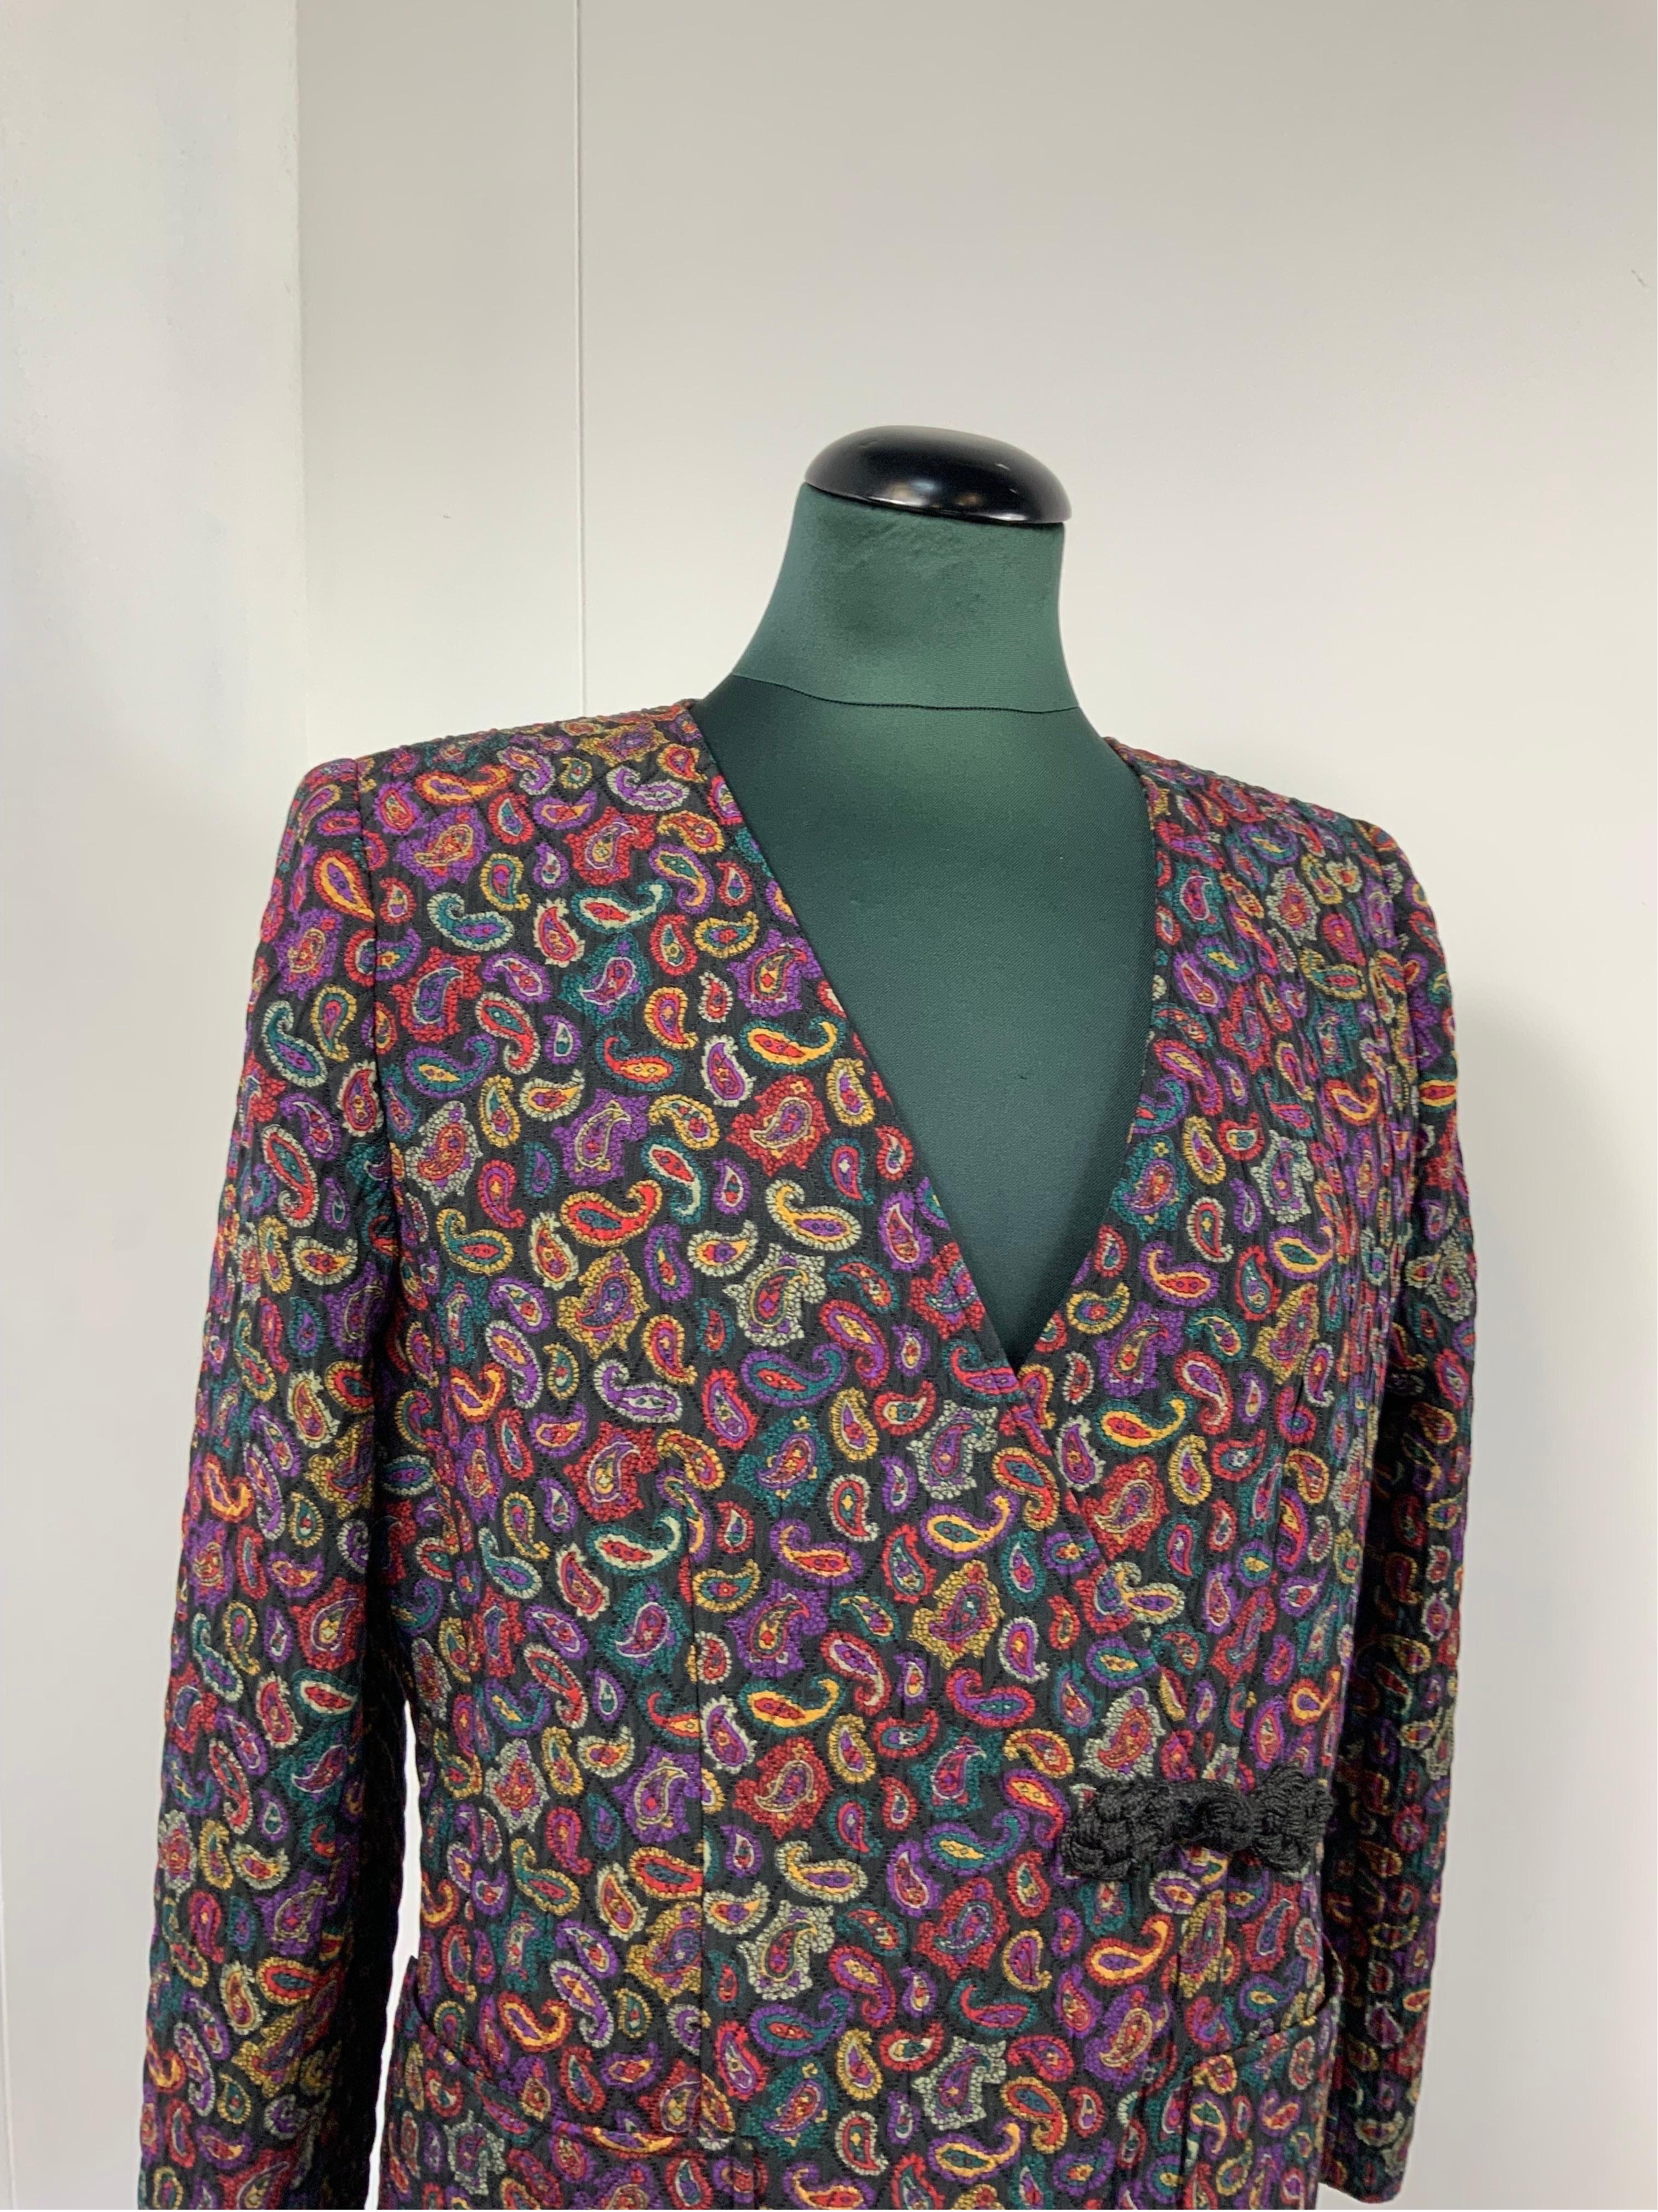 Valentino, Miss V Paisley Jacket In Good Condition For Sale In Carnate, IT